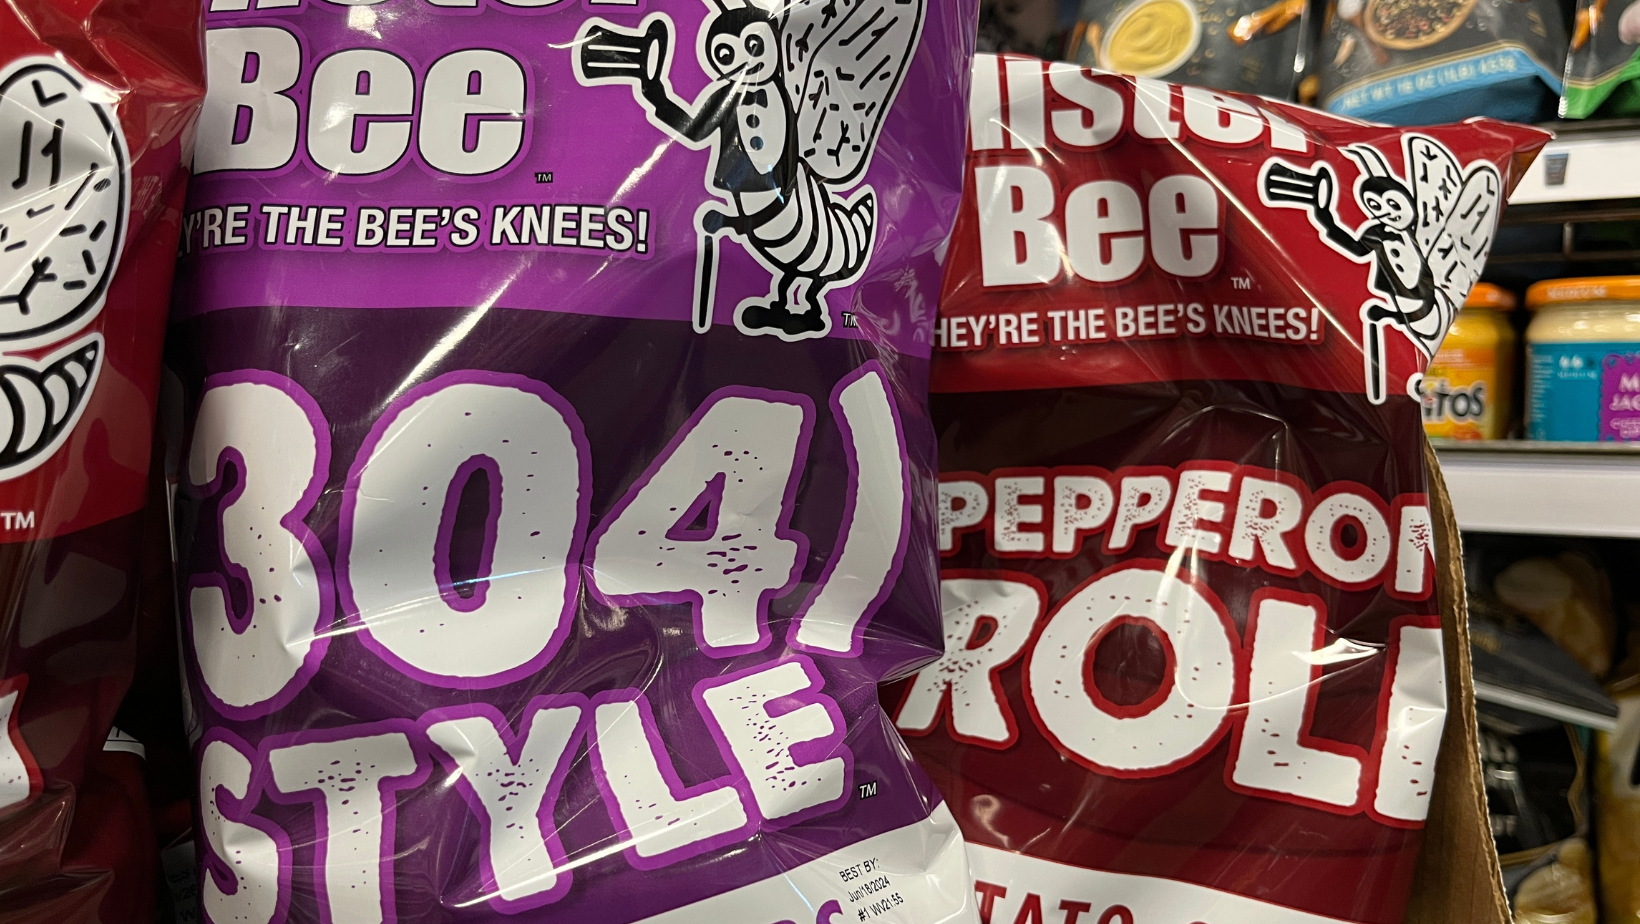 Mr. Bee's pepperoni roll flavor and 304 Style potato chips (WBOY image)